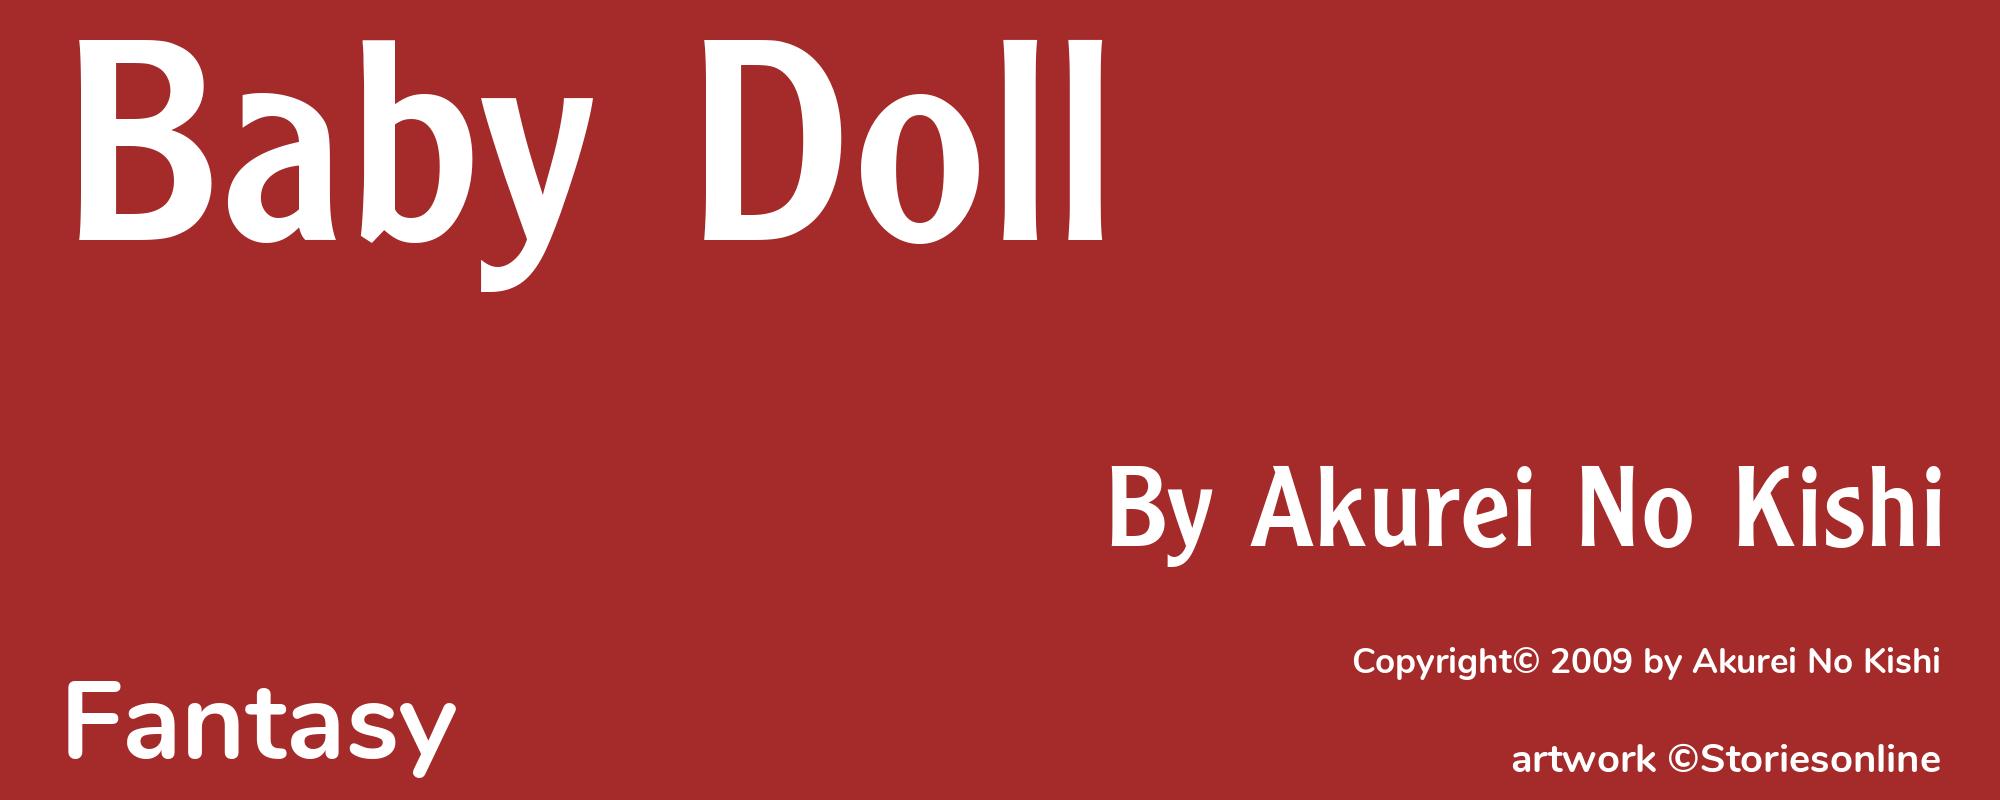 Baby Doll - Cover